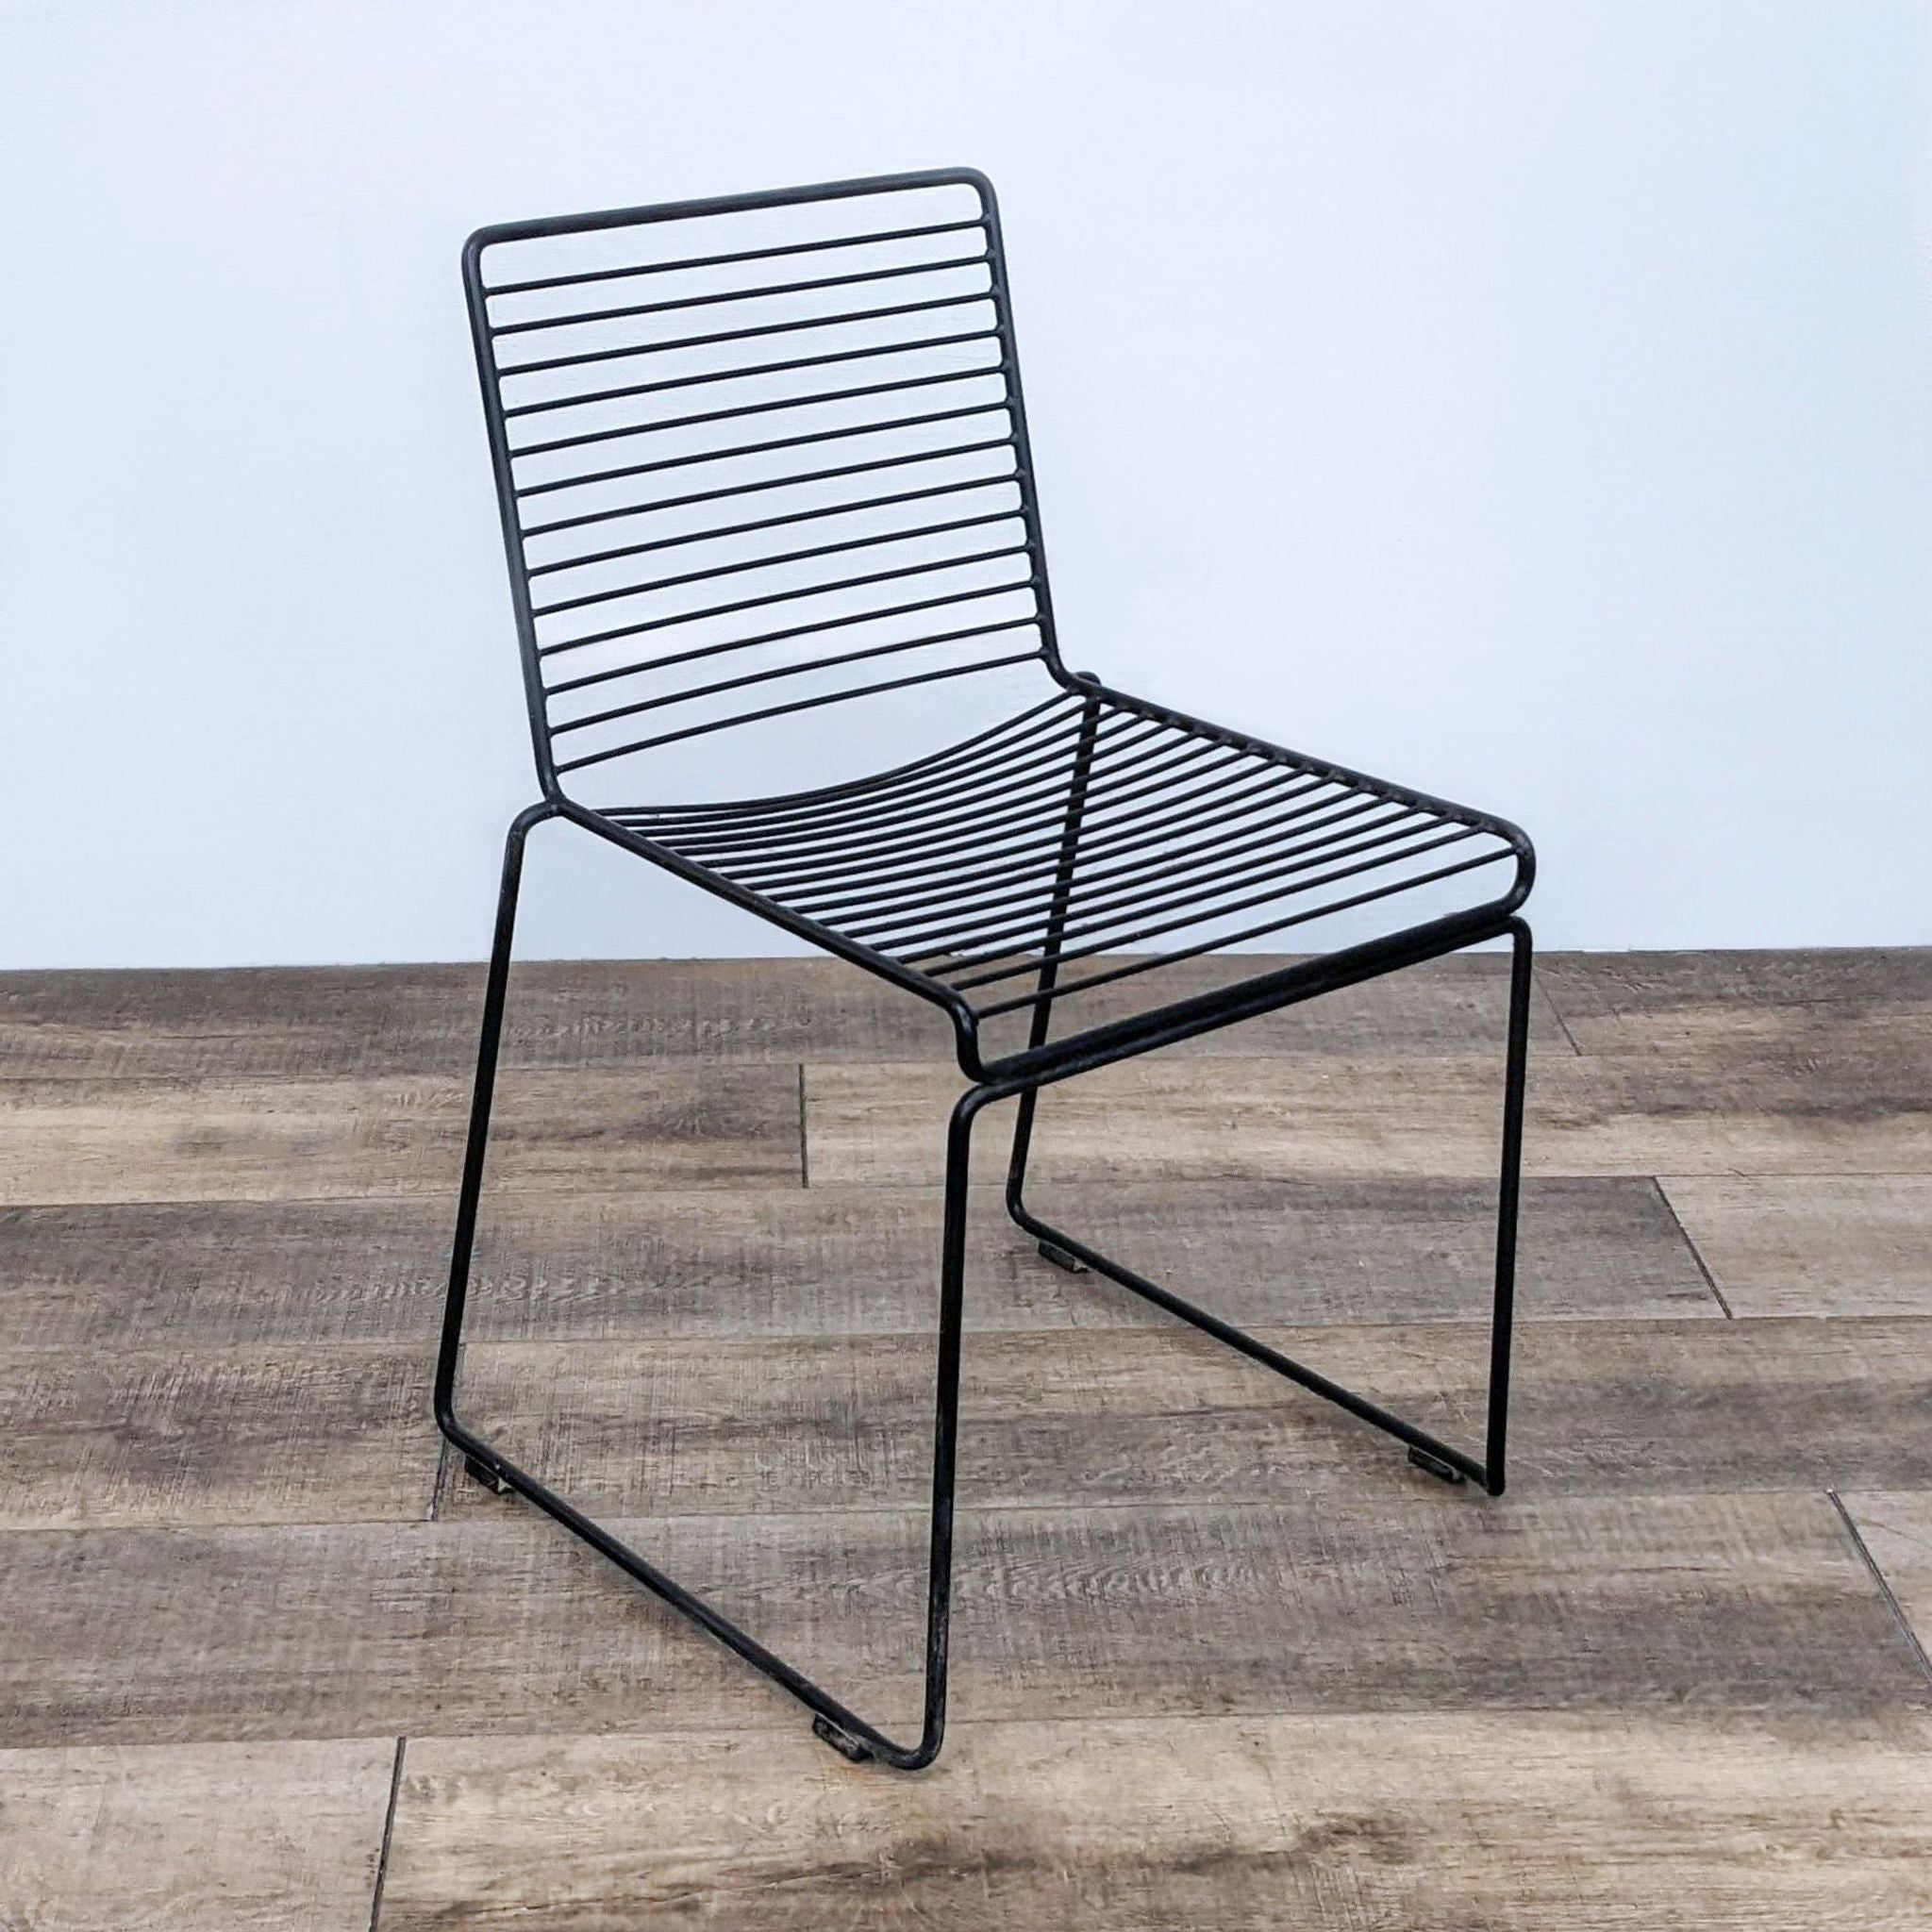 Steel HAY Hee modern dining chair with powder-coated finish, suitable for both indoor and outdoor, stackable design.